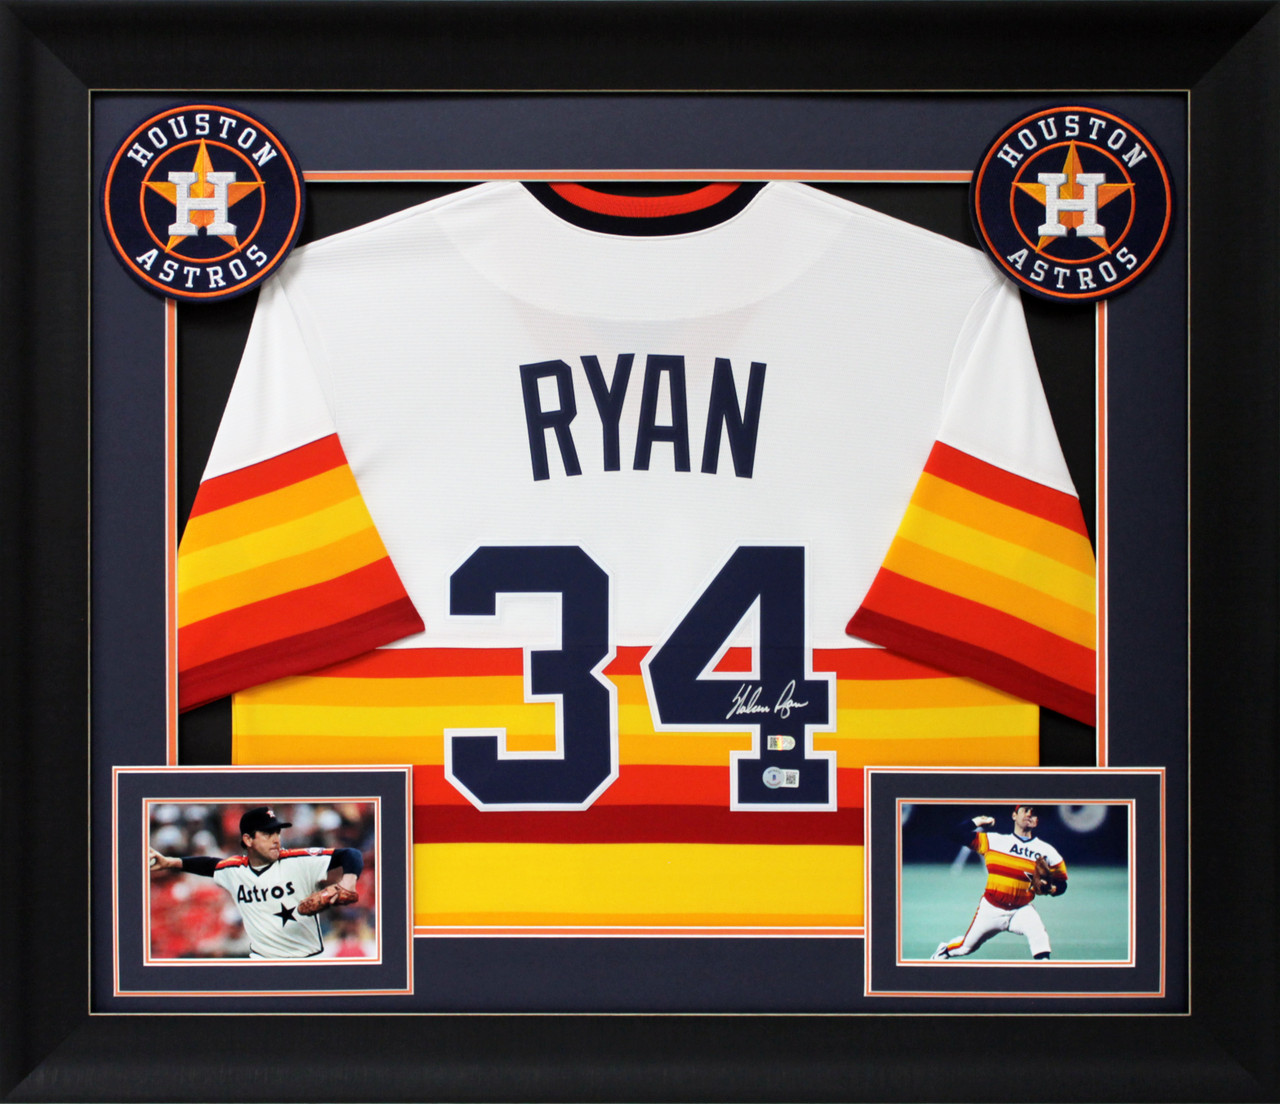 Astros Nolan Ryan Authentic Signed Rainbow Nike Framed Jersey